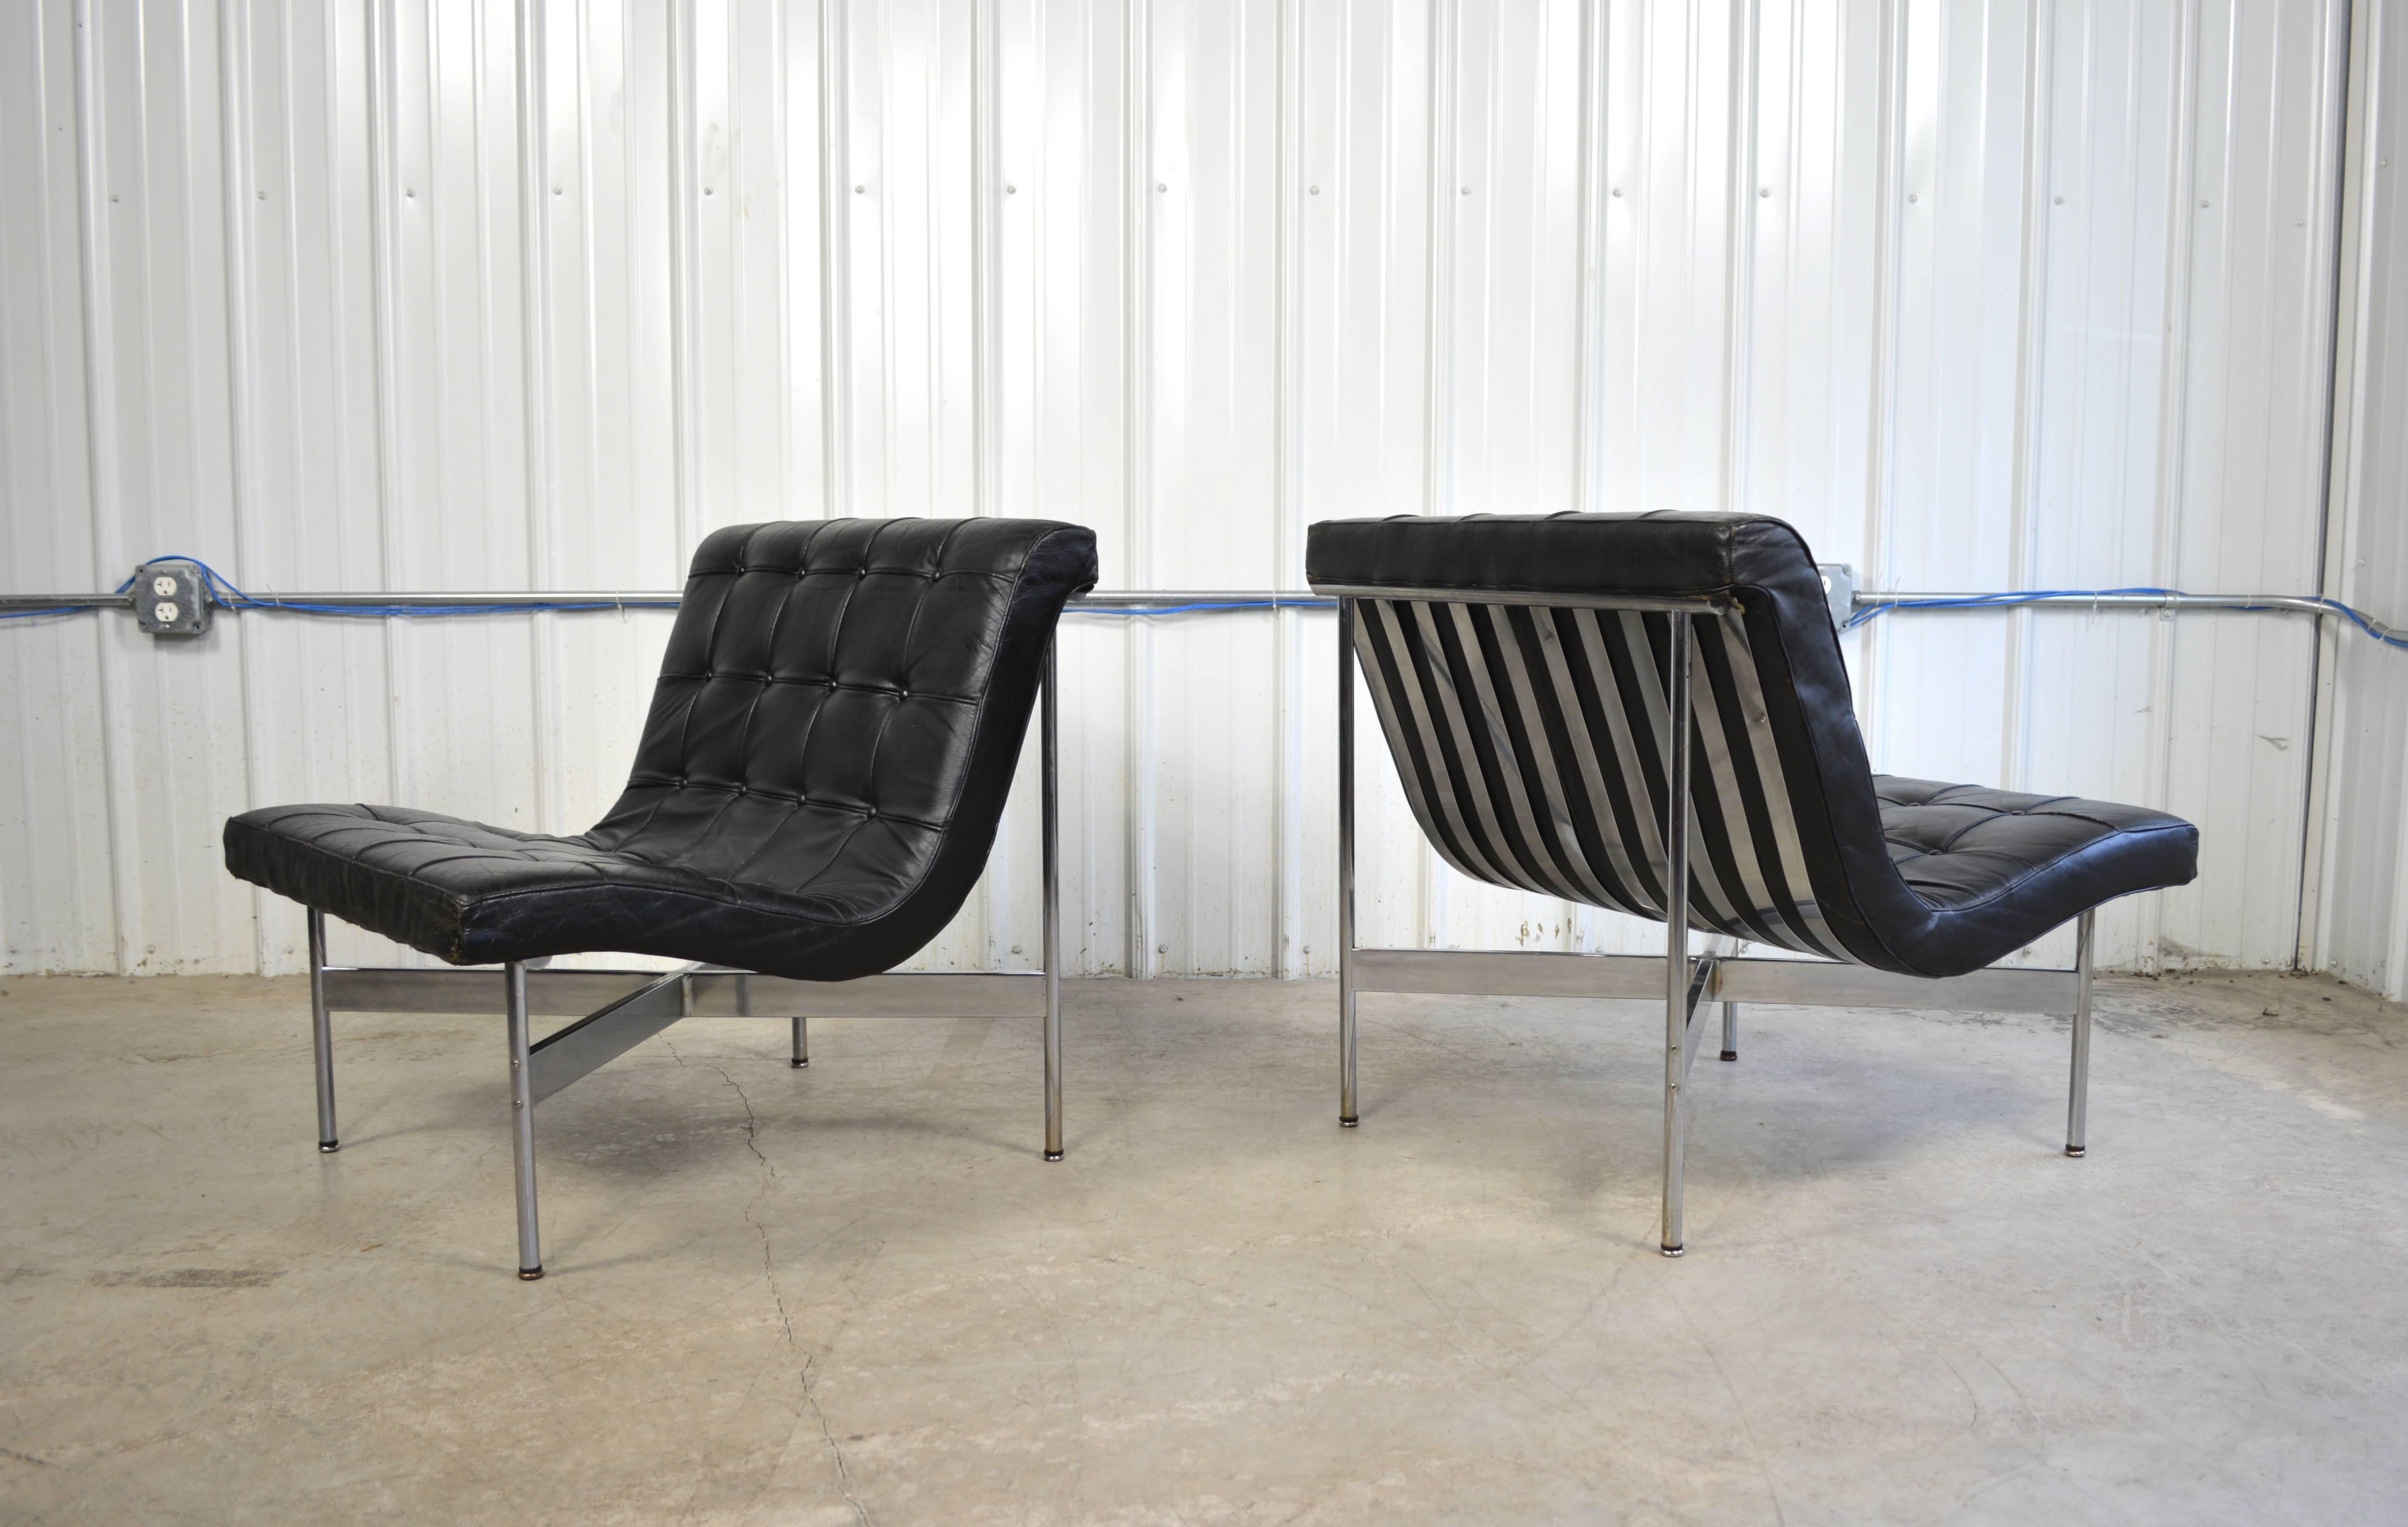 A pair of New York lounge chairs by Katavolos, Littell and Kelley for Laverne International. Chromed steel frames. Original black leather upholstery.